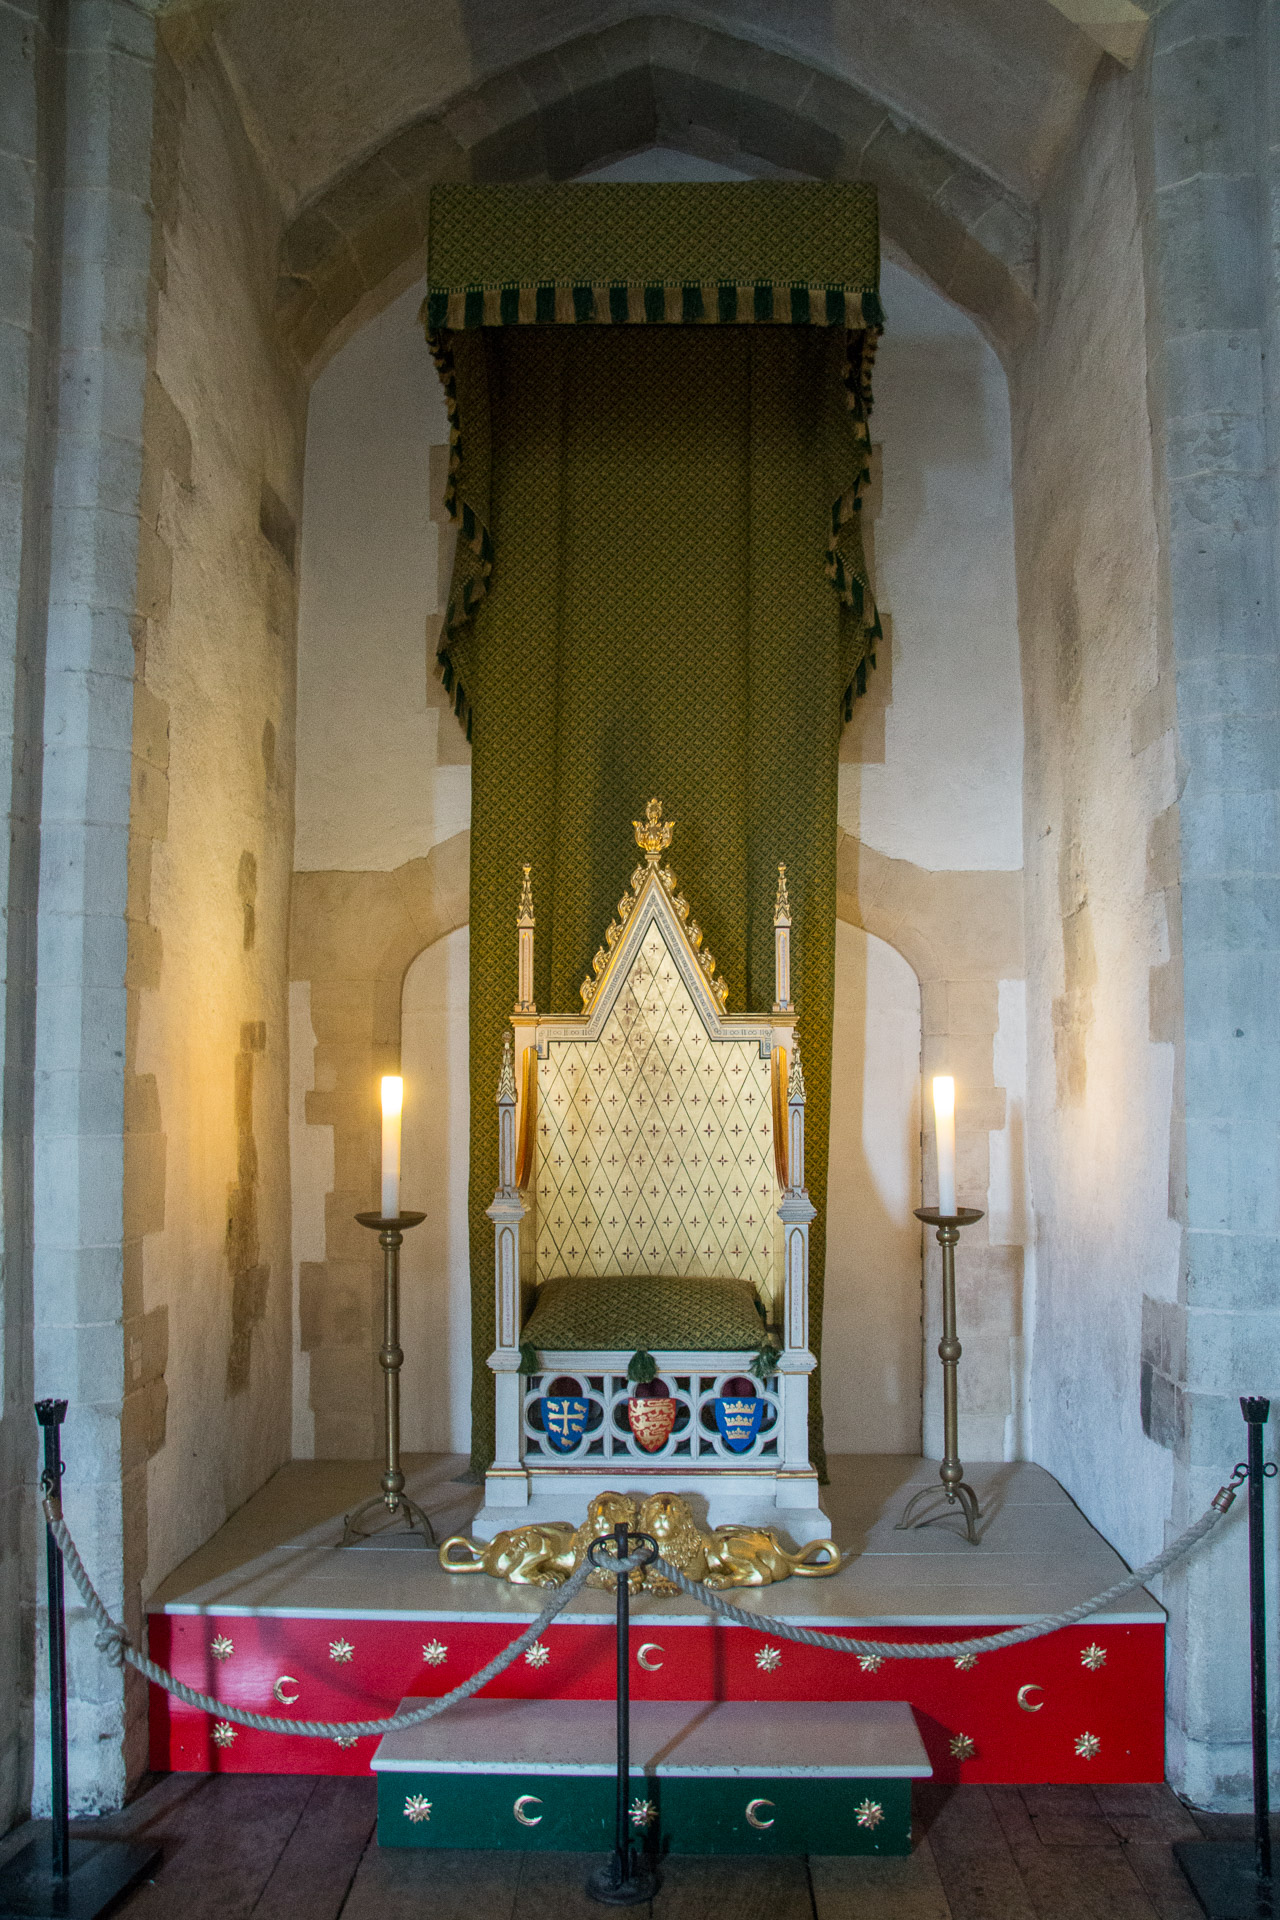 Throne room in the Medieval Palace at the Tower of London